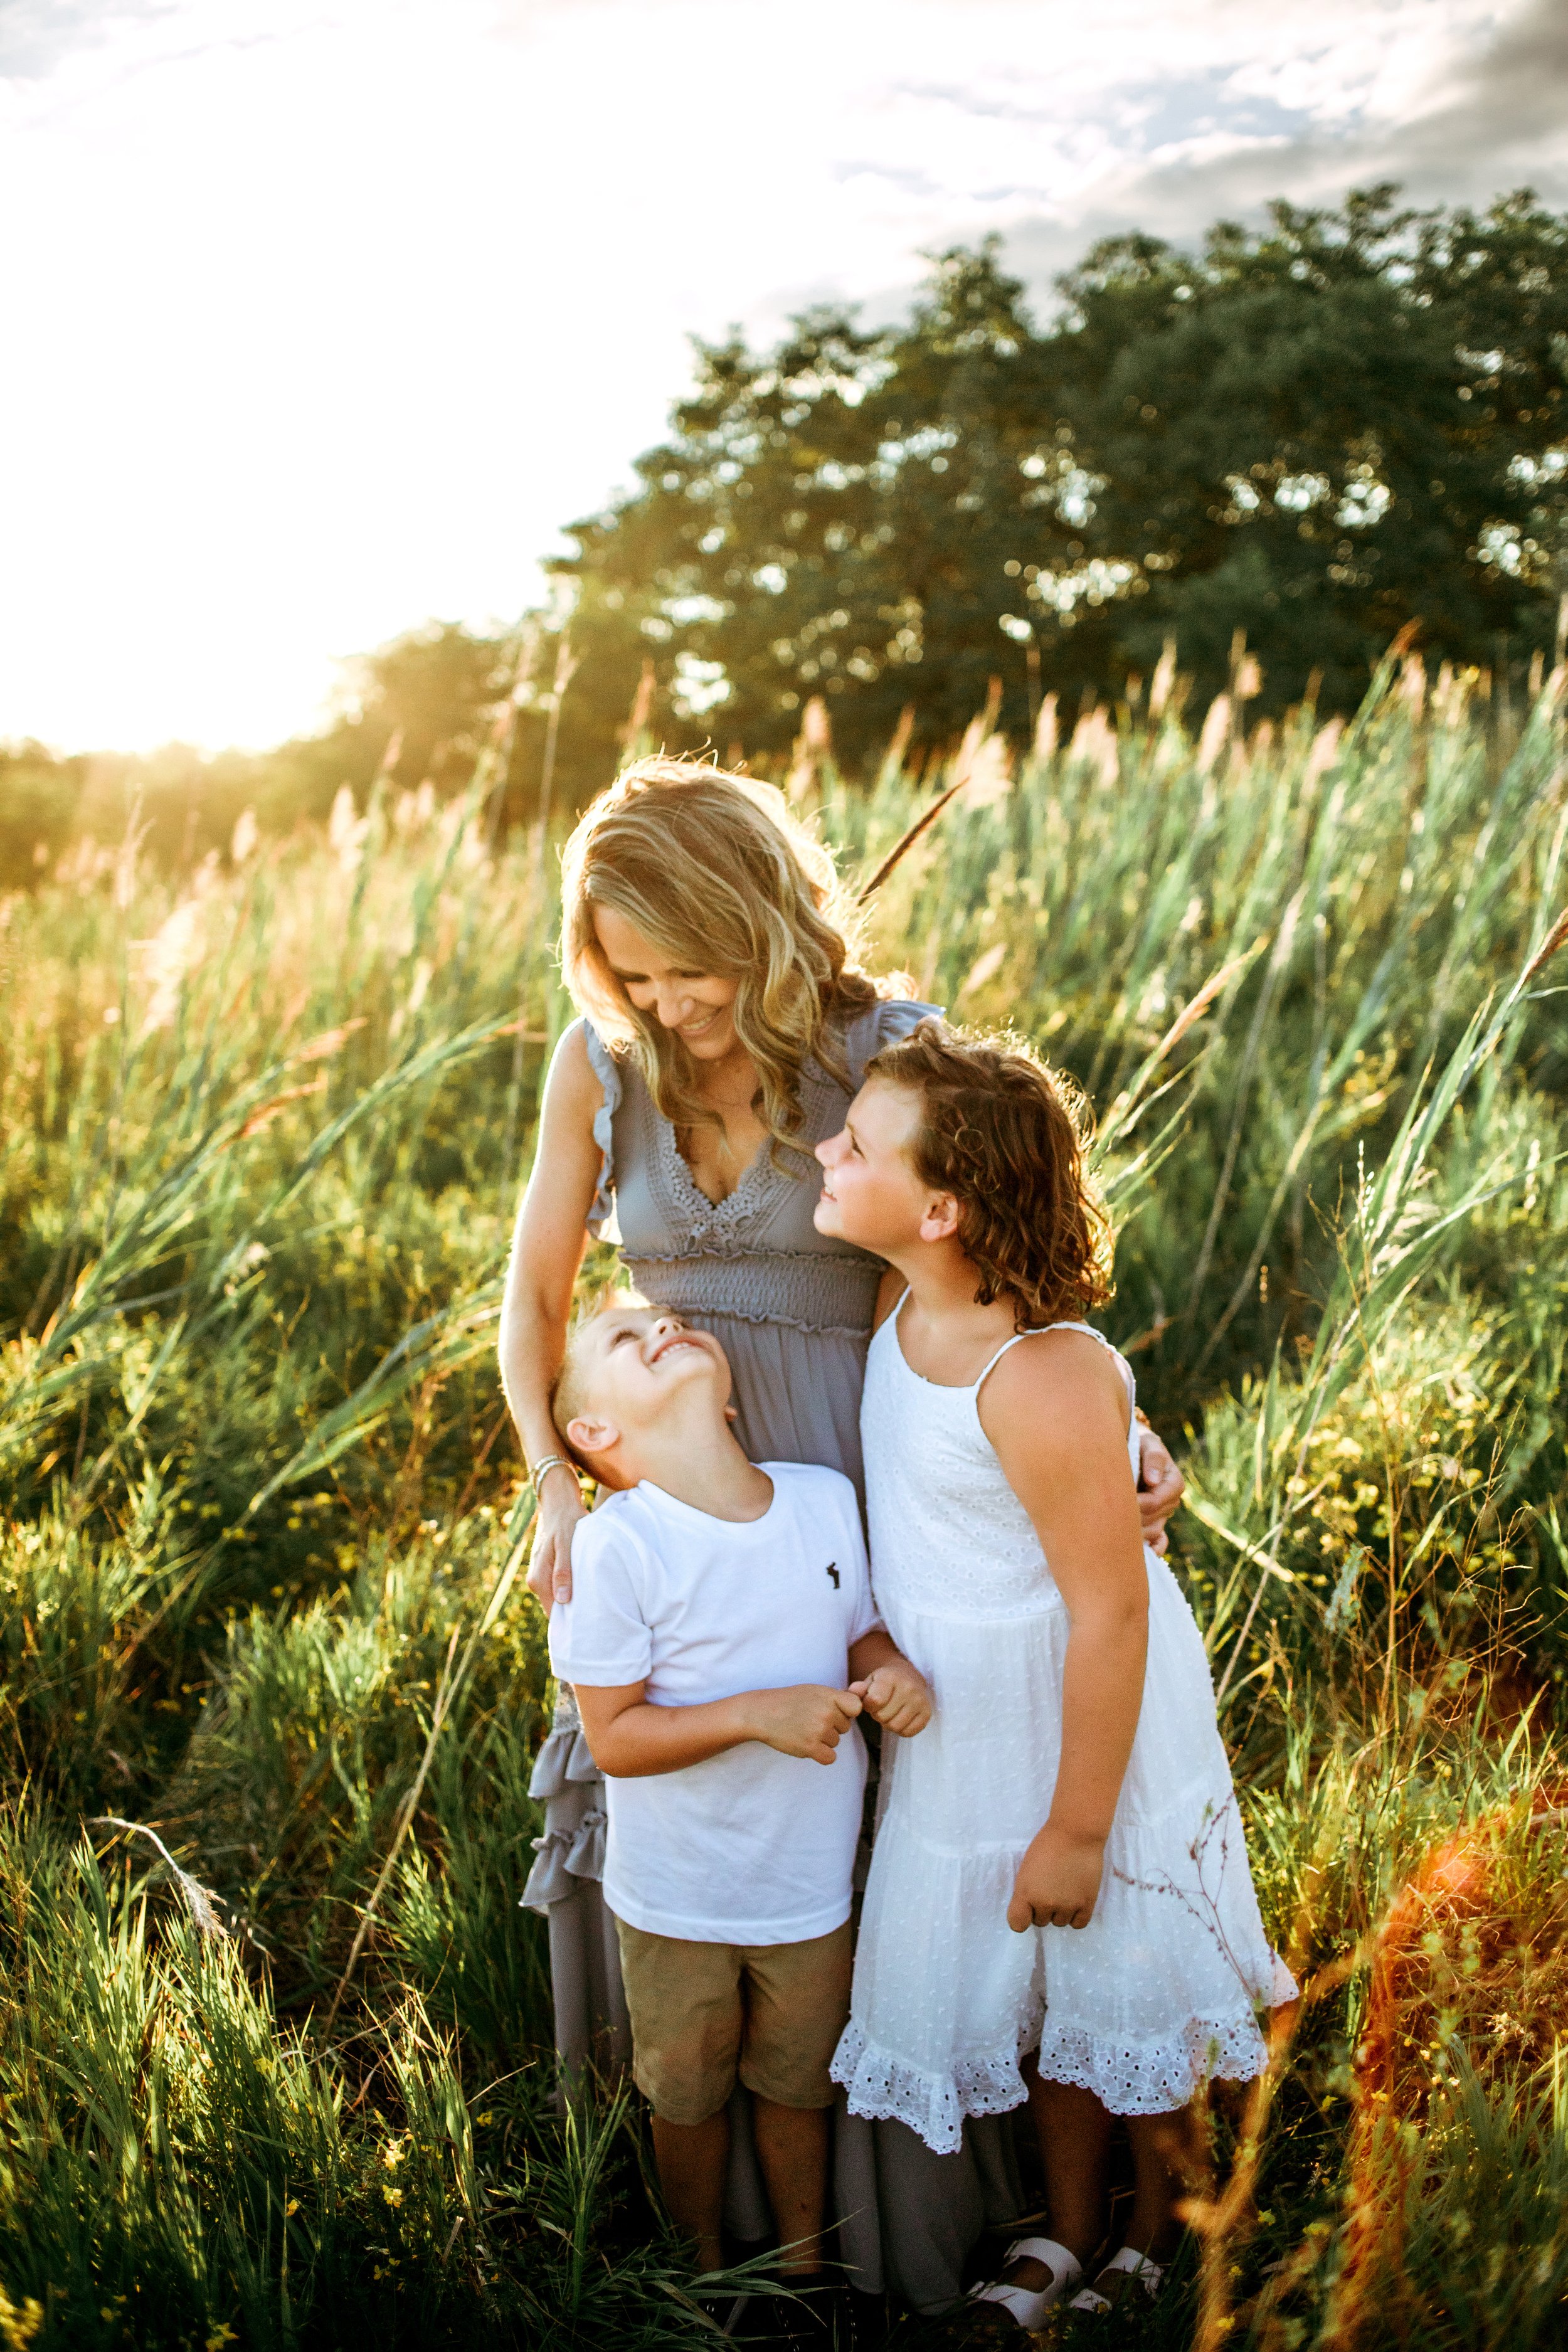  Professional family photographer Teala Ward Photography captures a small family laughing as the sun sets behind them. Illinois fam pics #motherhood #mommapics #TealaWardPhotography #TealaWardFamilies #IllinoisPhotographers #IllinoisFamilyPhotography